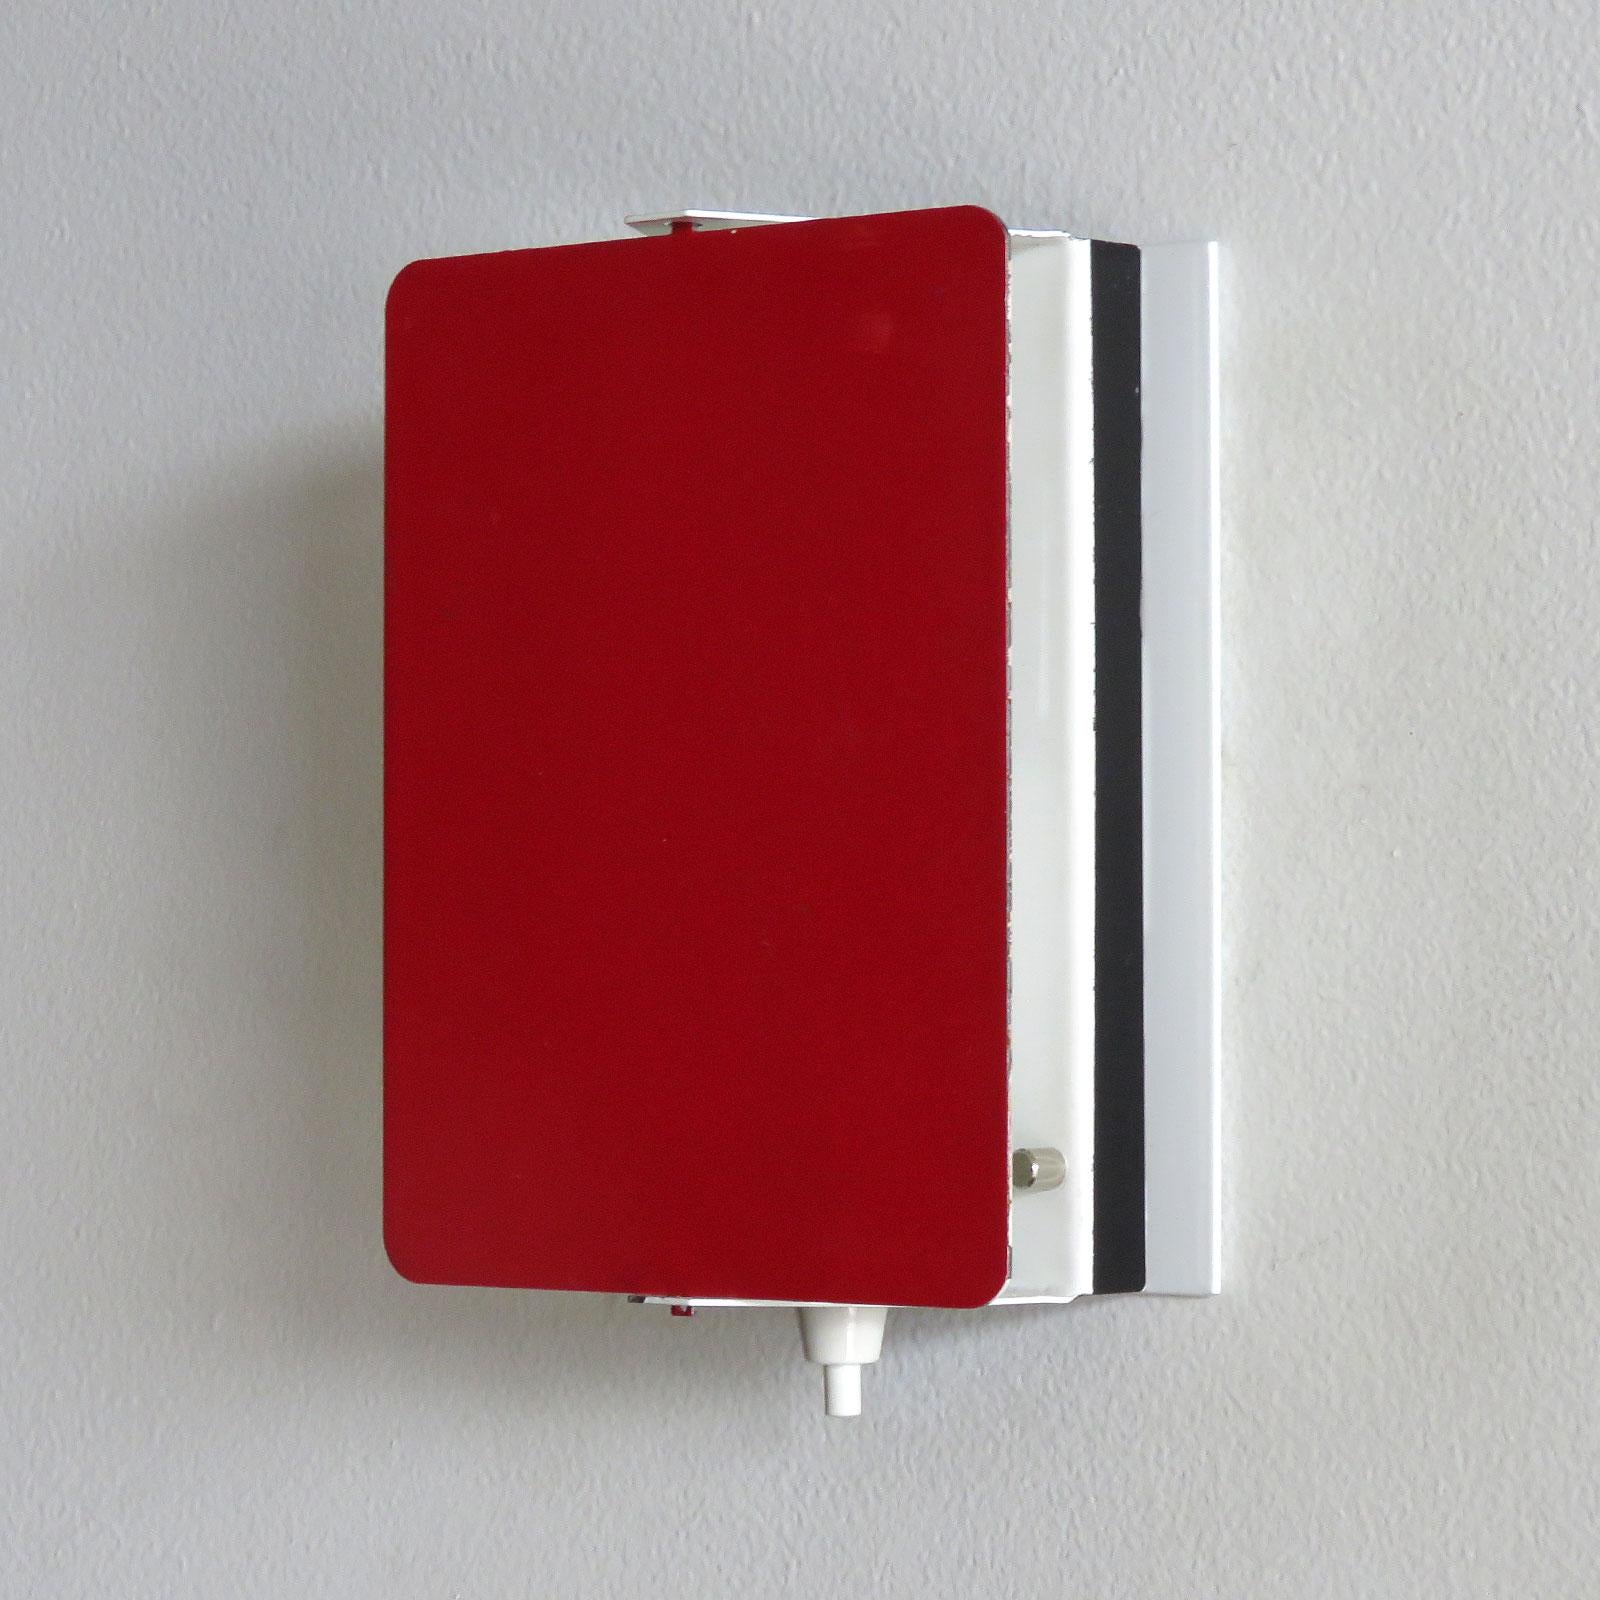 Mid-Century Modern Red CP-1 Wall Lights by Charlotte Perriand, 1960 For Sale